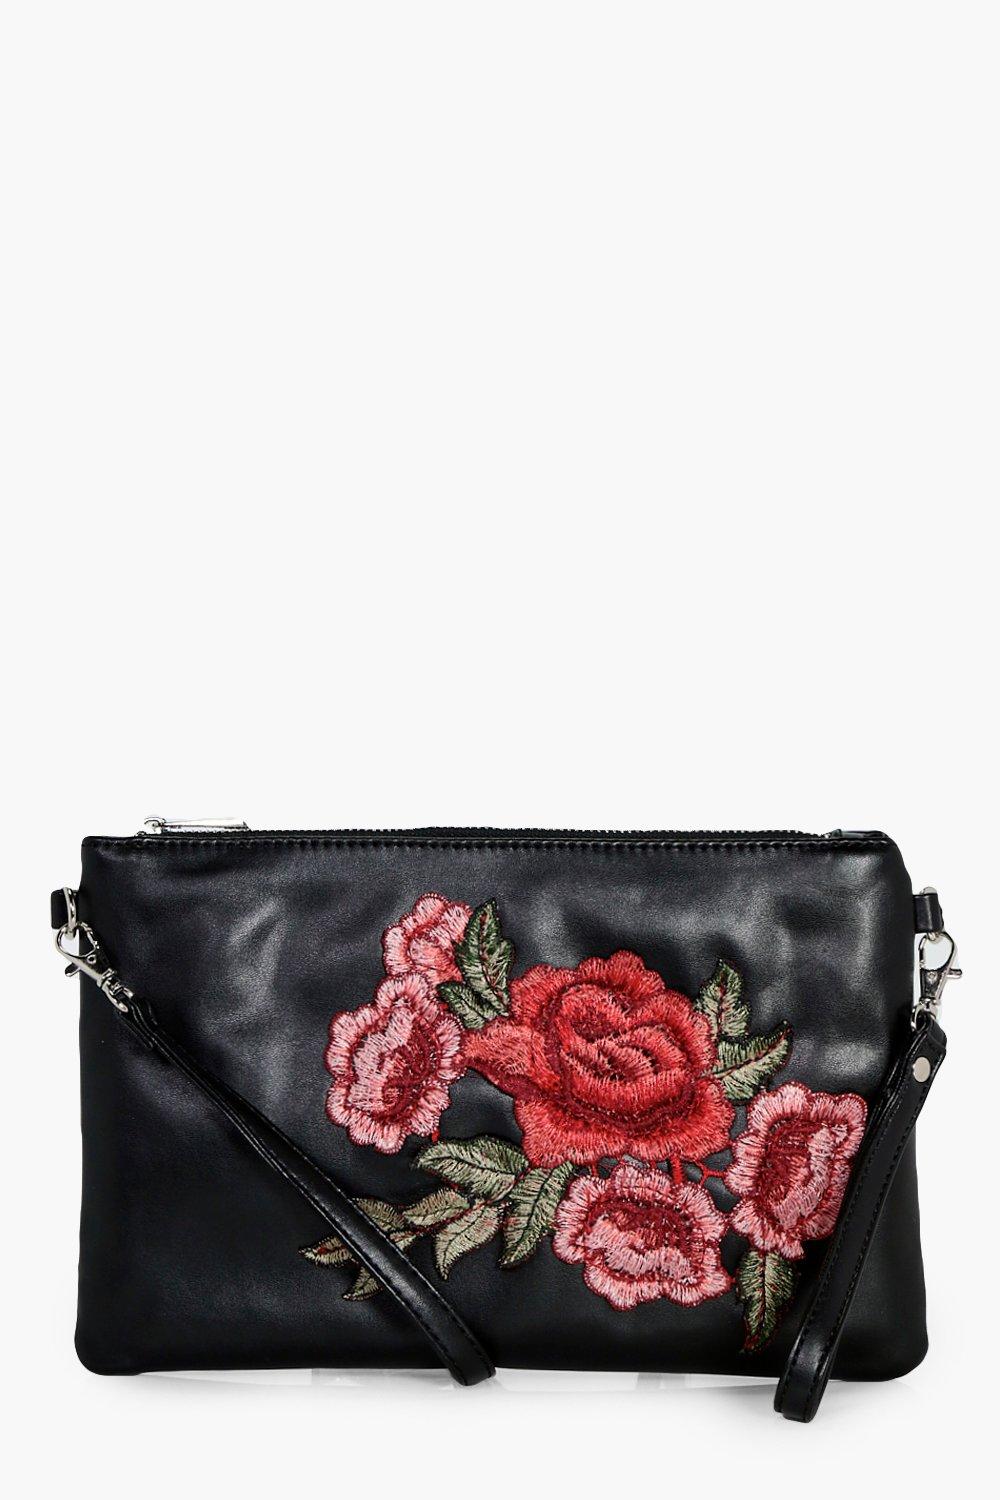 embroidered cross body bag